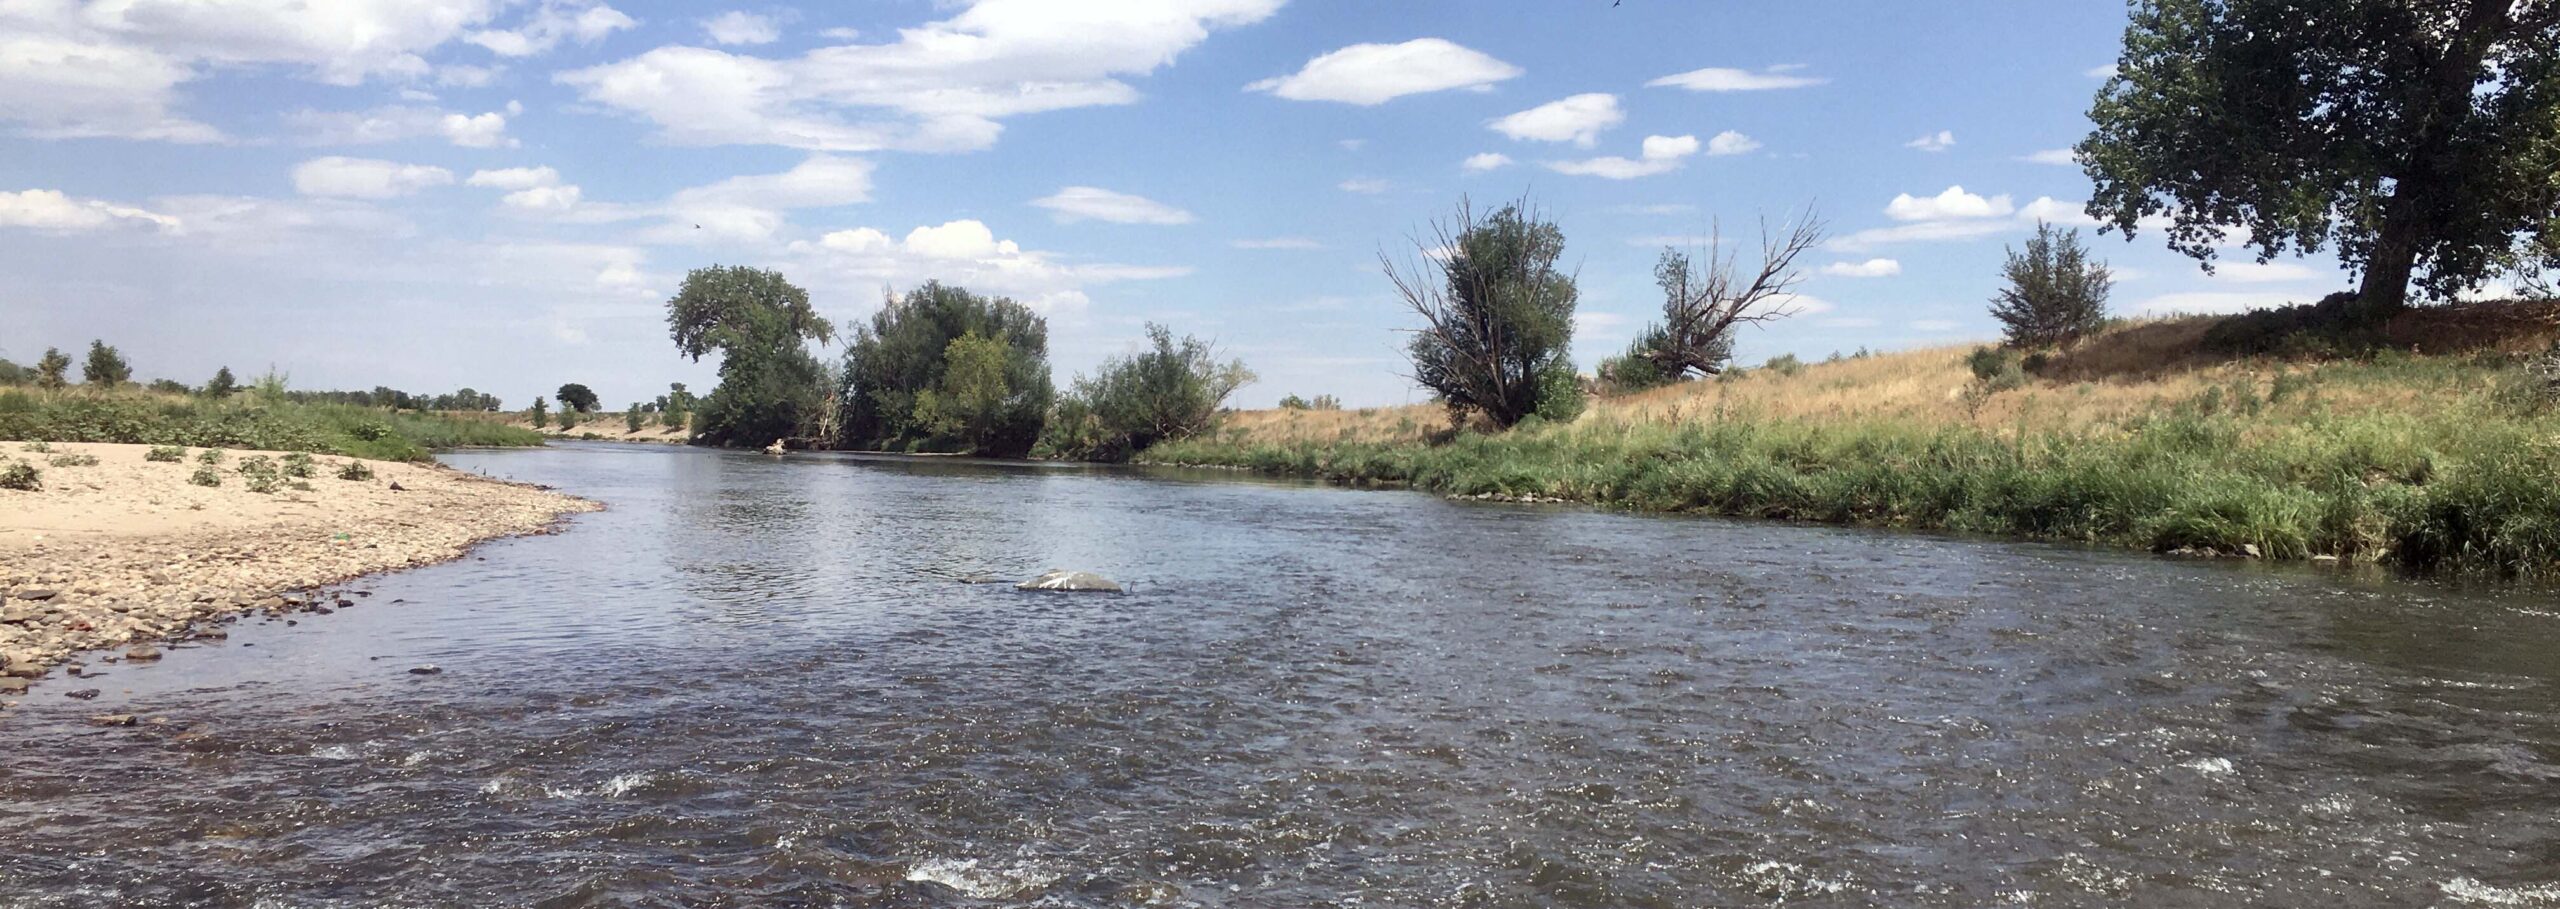 the South Platte River flowing with trees on the banks